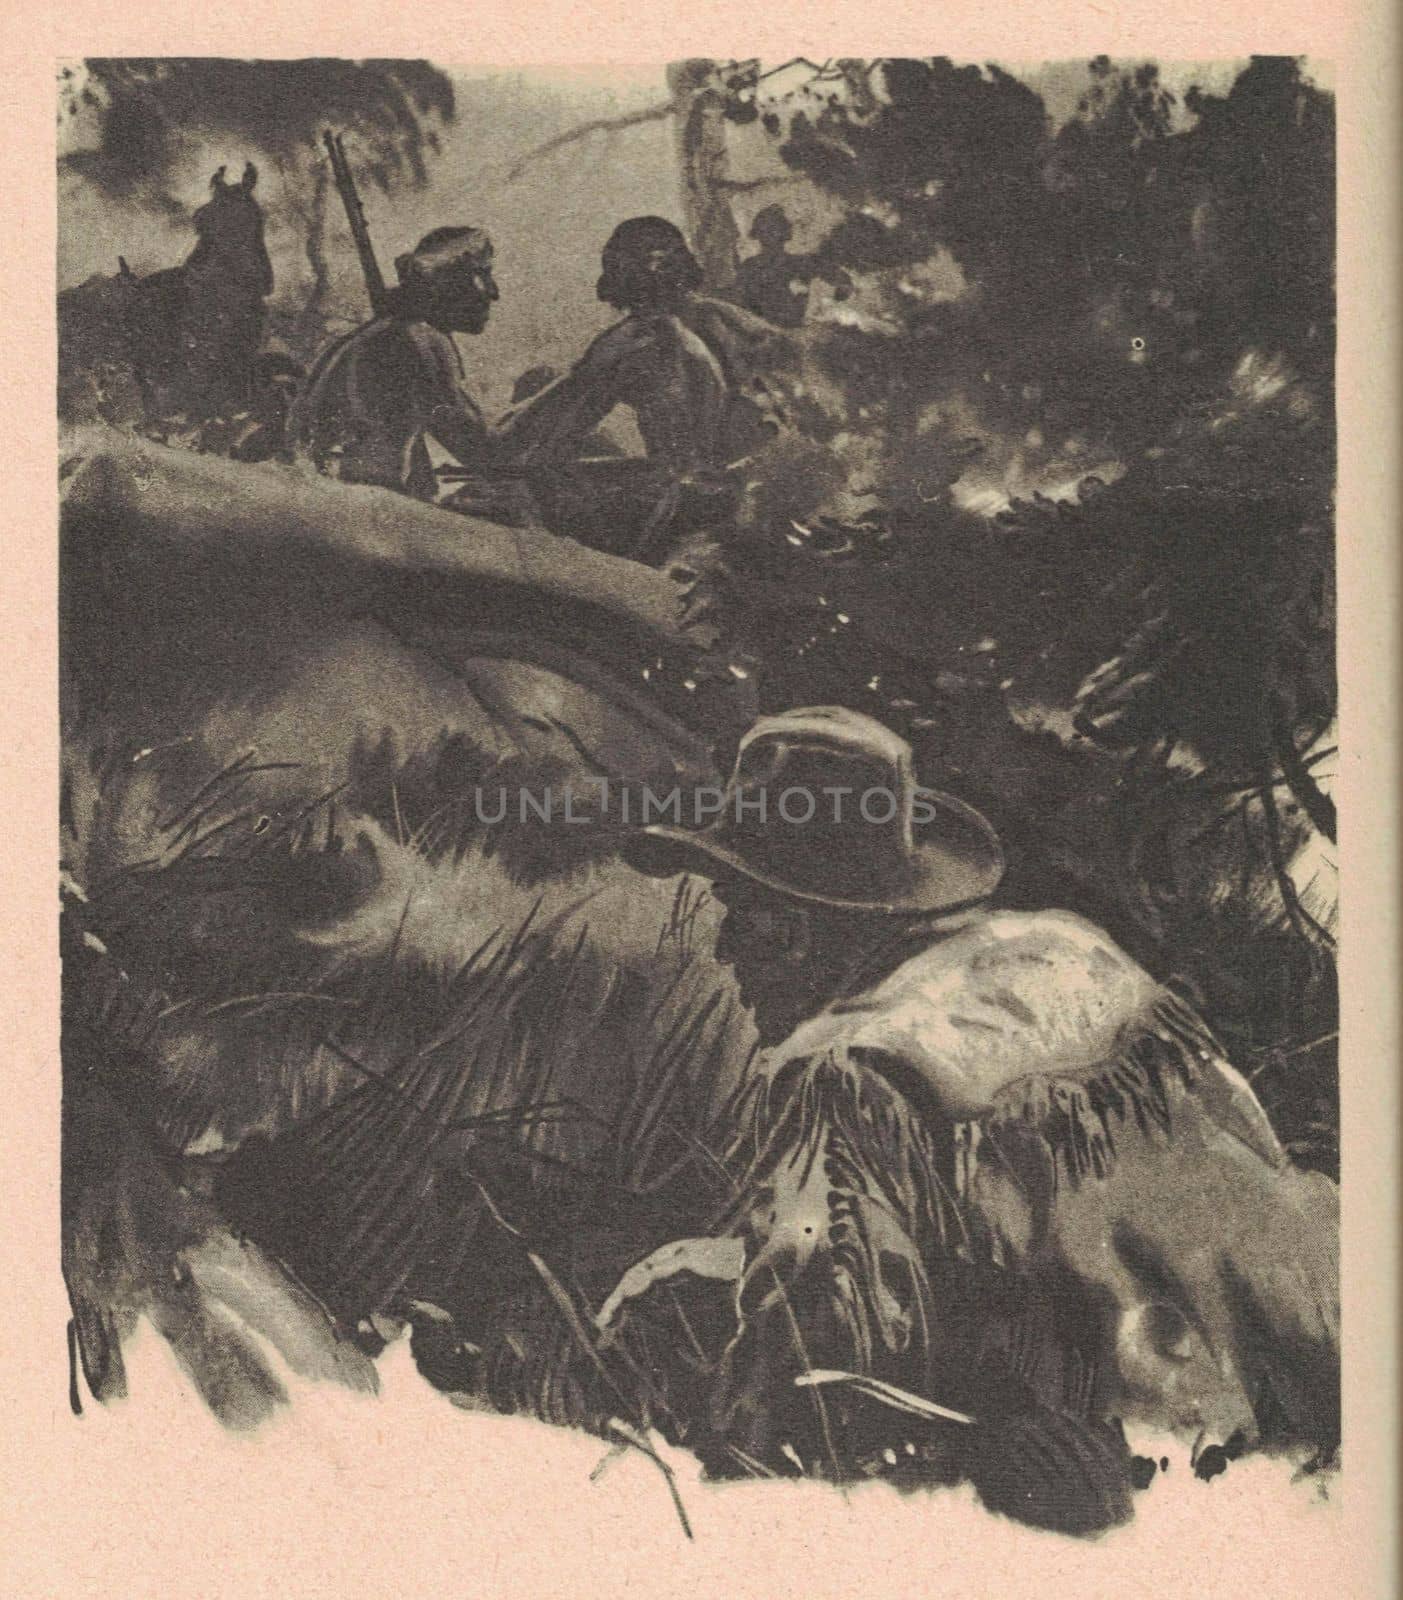 Black and white illustration shows a hidden man spying on American Indians. Drawing shows life in the Wild West. Vintage black and white picture shows adventure life in the previous century.